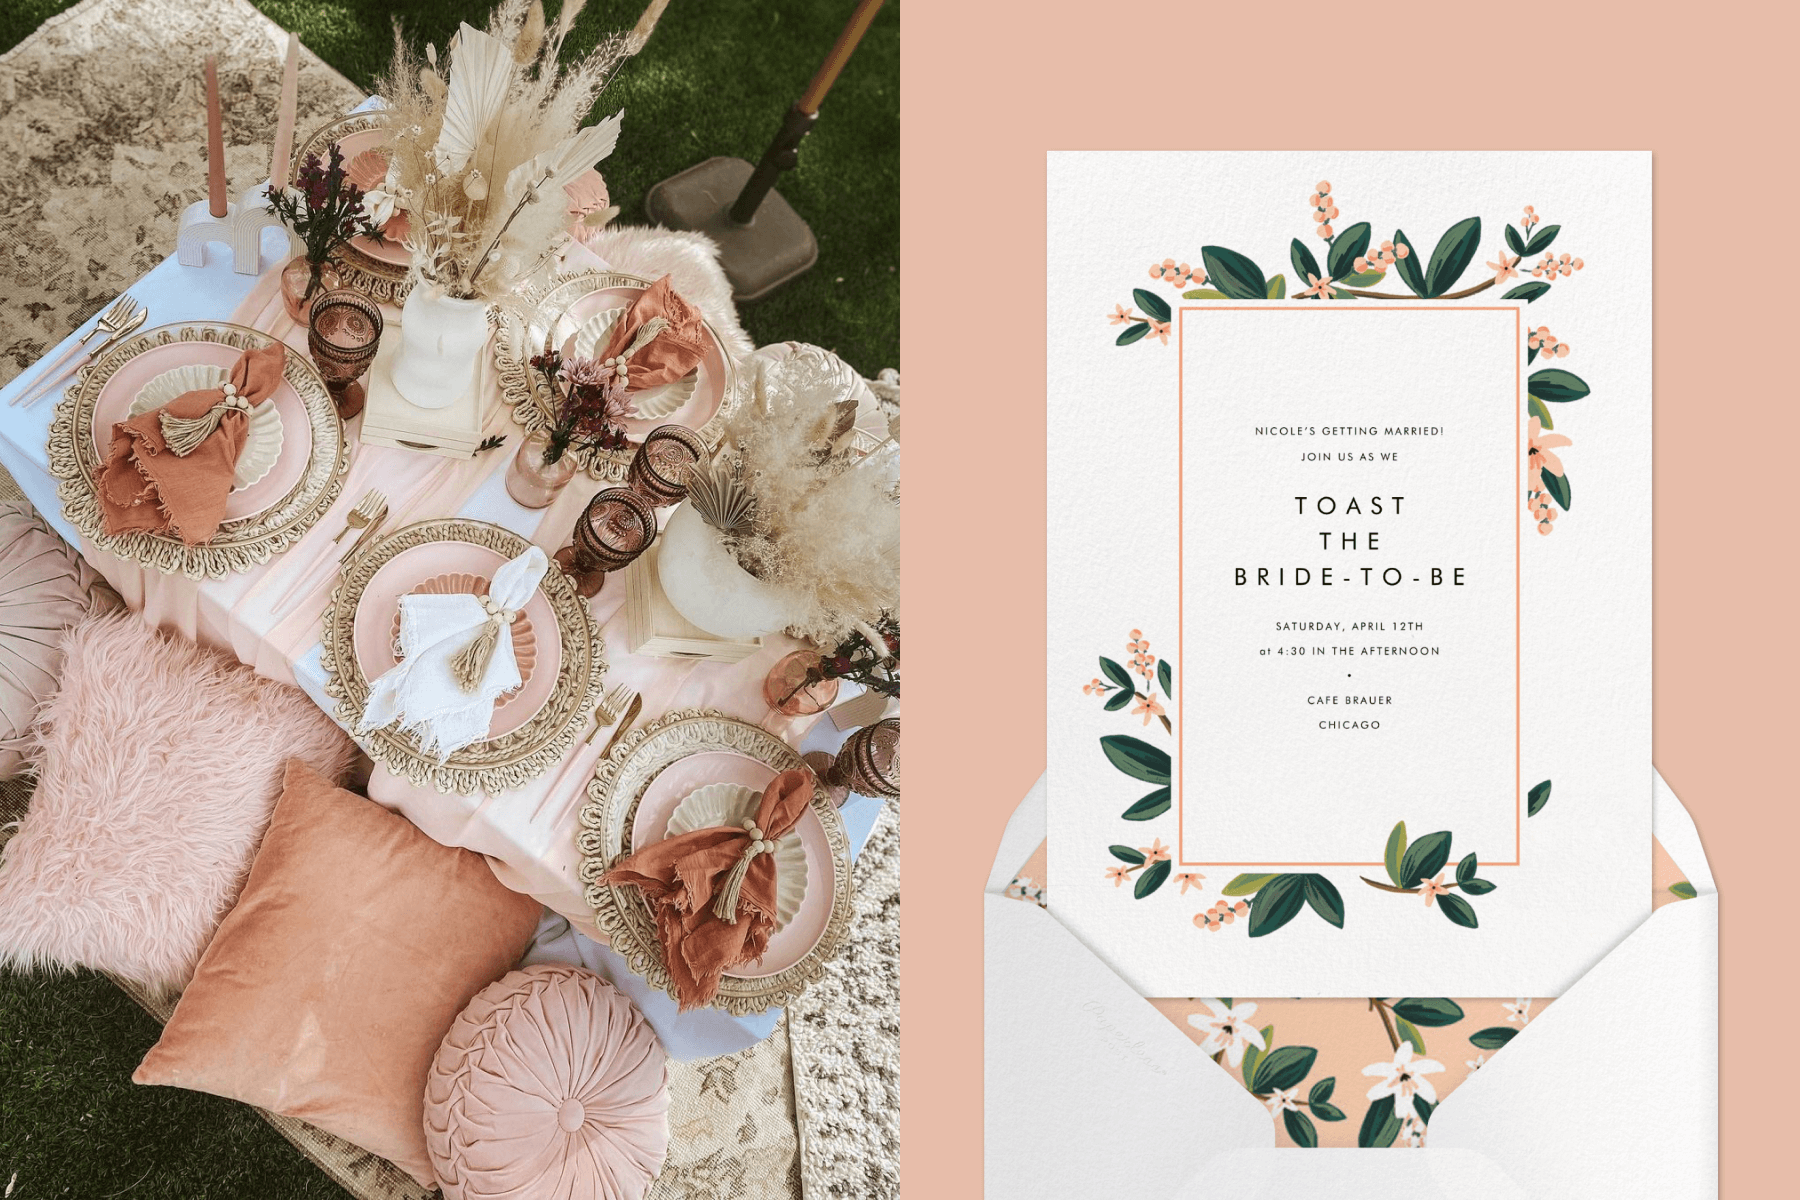 Left: A boho-style picnic for six with a blush pink palette. Right: A bridal shower invitation with a thin border of illustrated small pink flowers and green leaves.